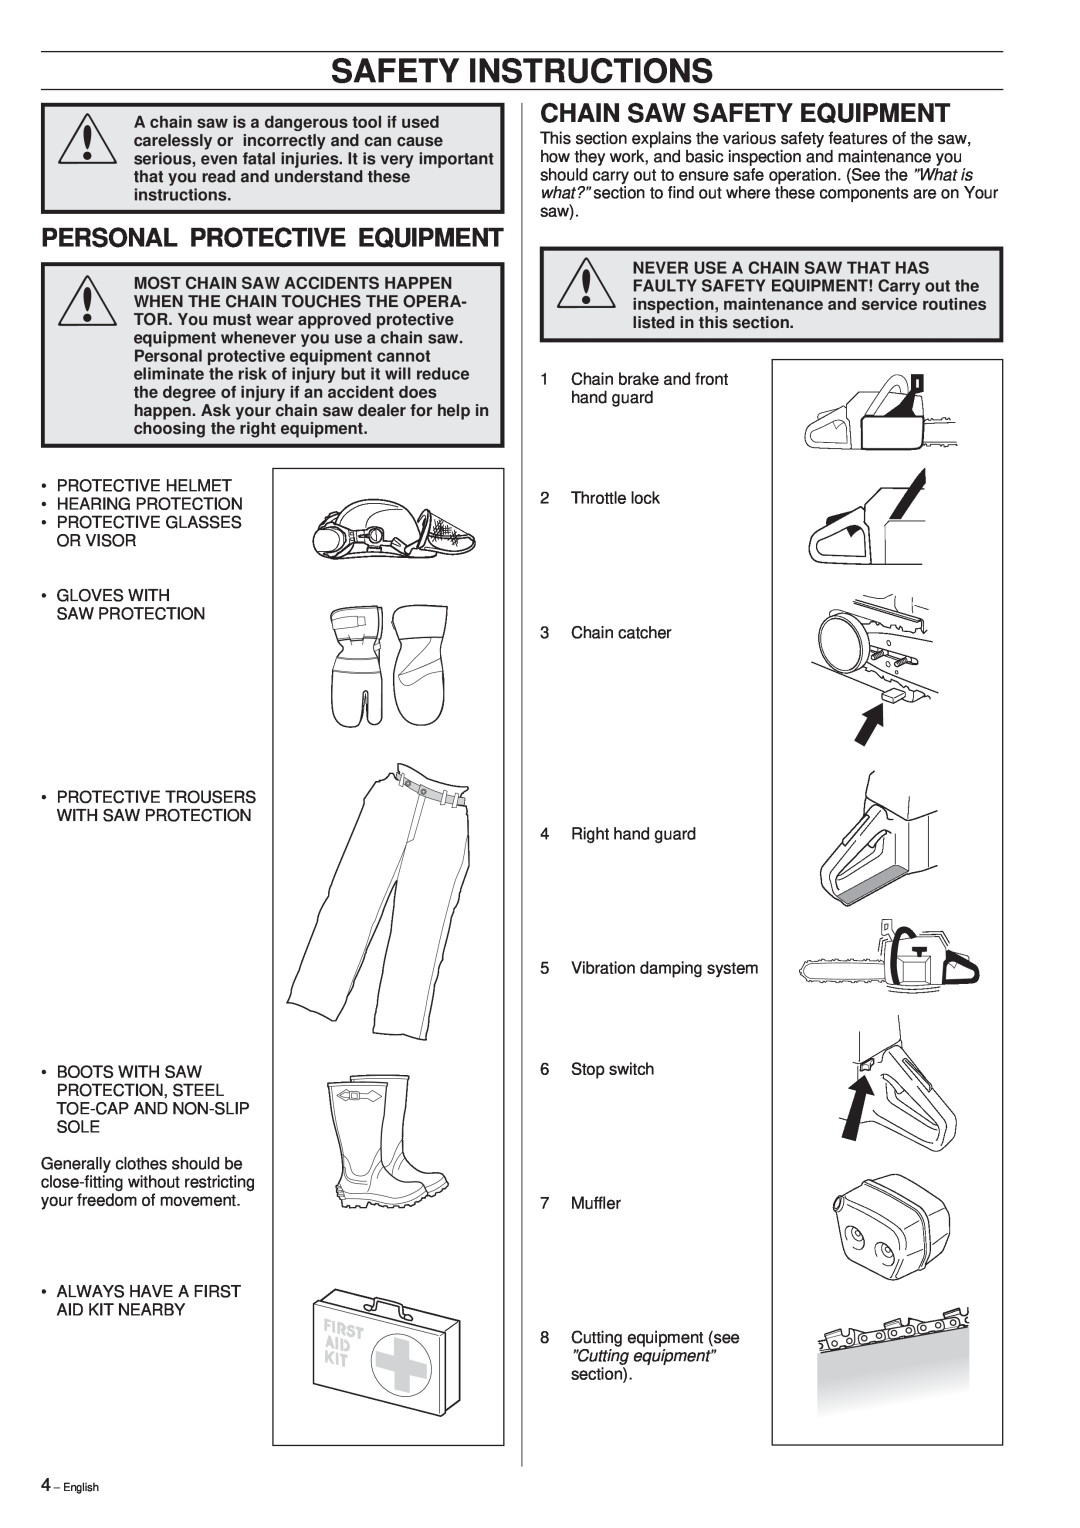 Husqvarna 288XP/XP lite manual Safety Instructions, Personal Protective Equipment, Chain Saw Safety Equipment 